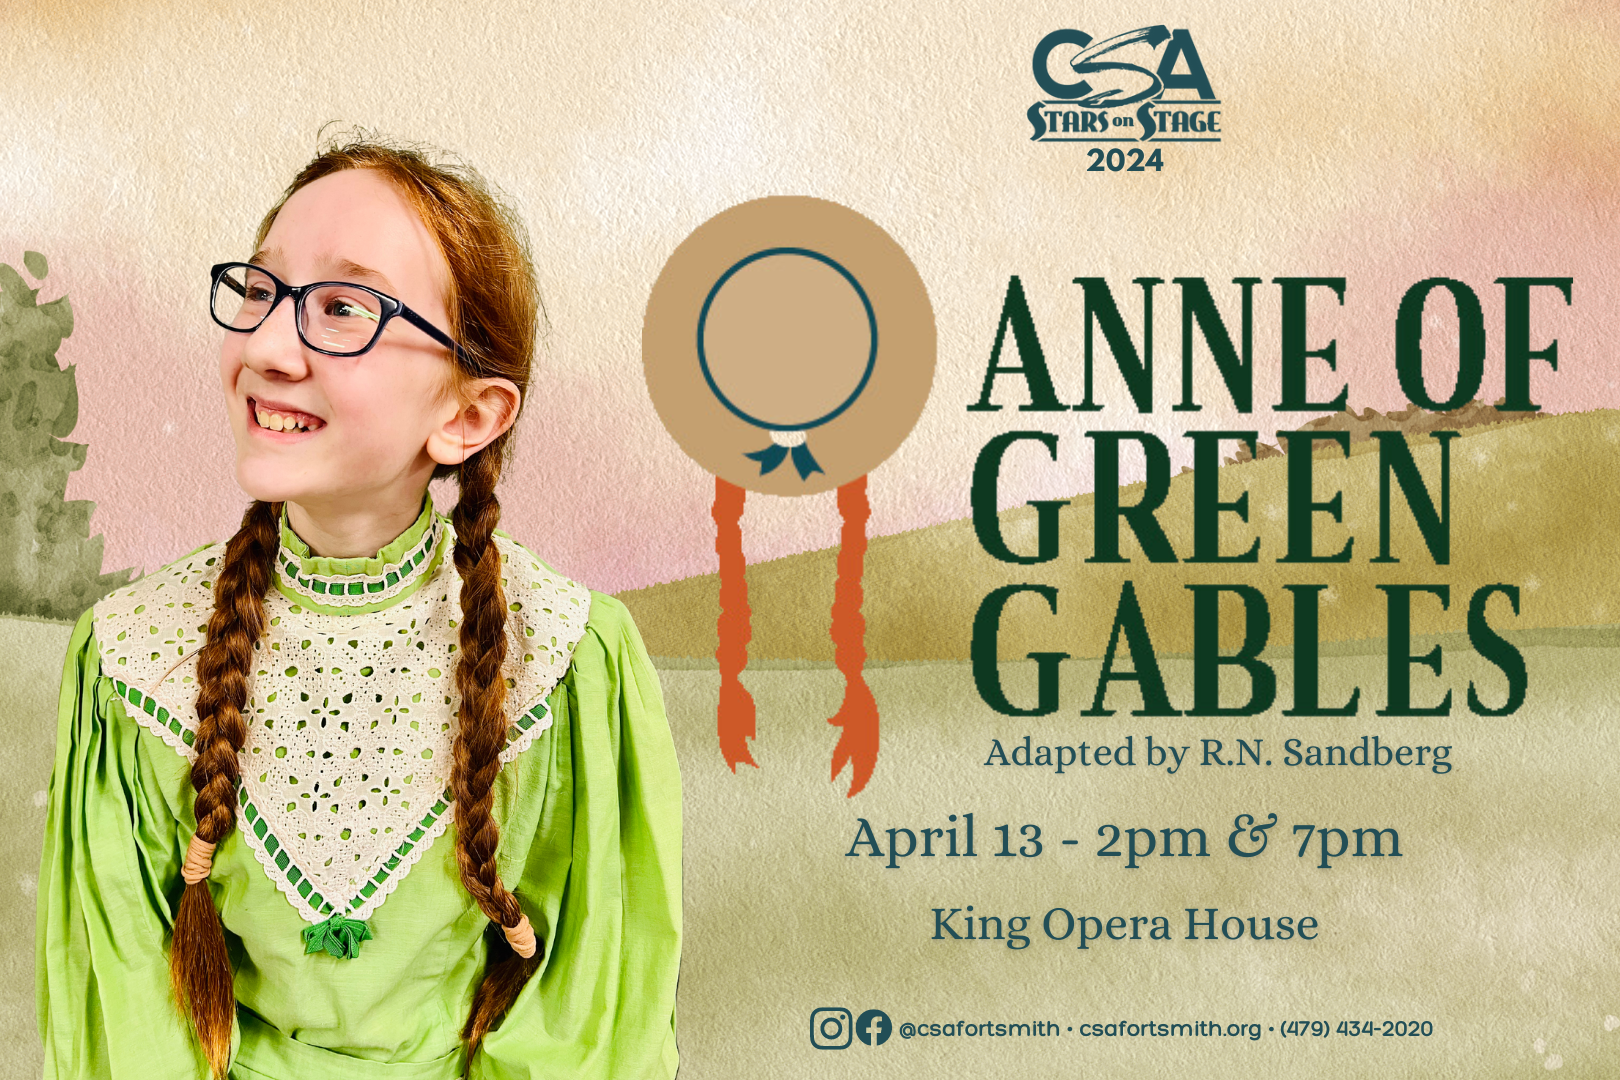 Community School of the Arts Announces Anne of Green Gables